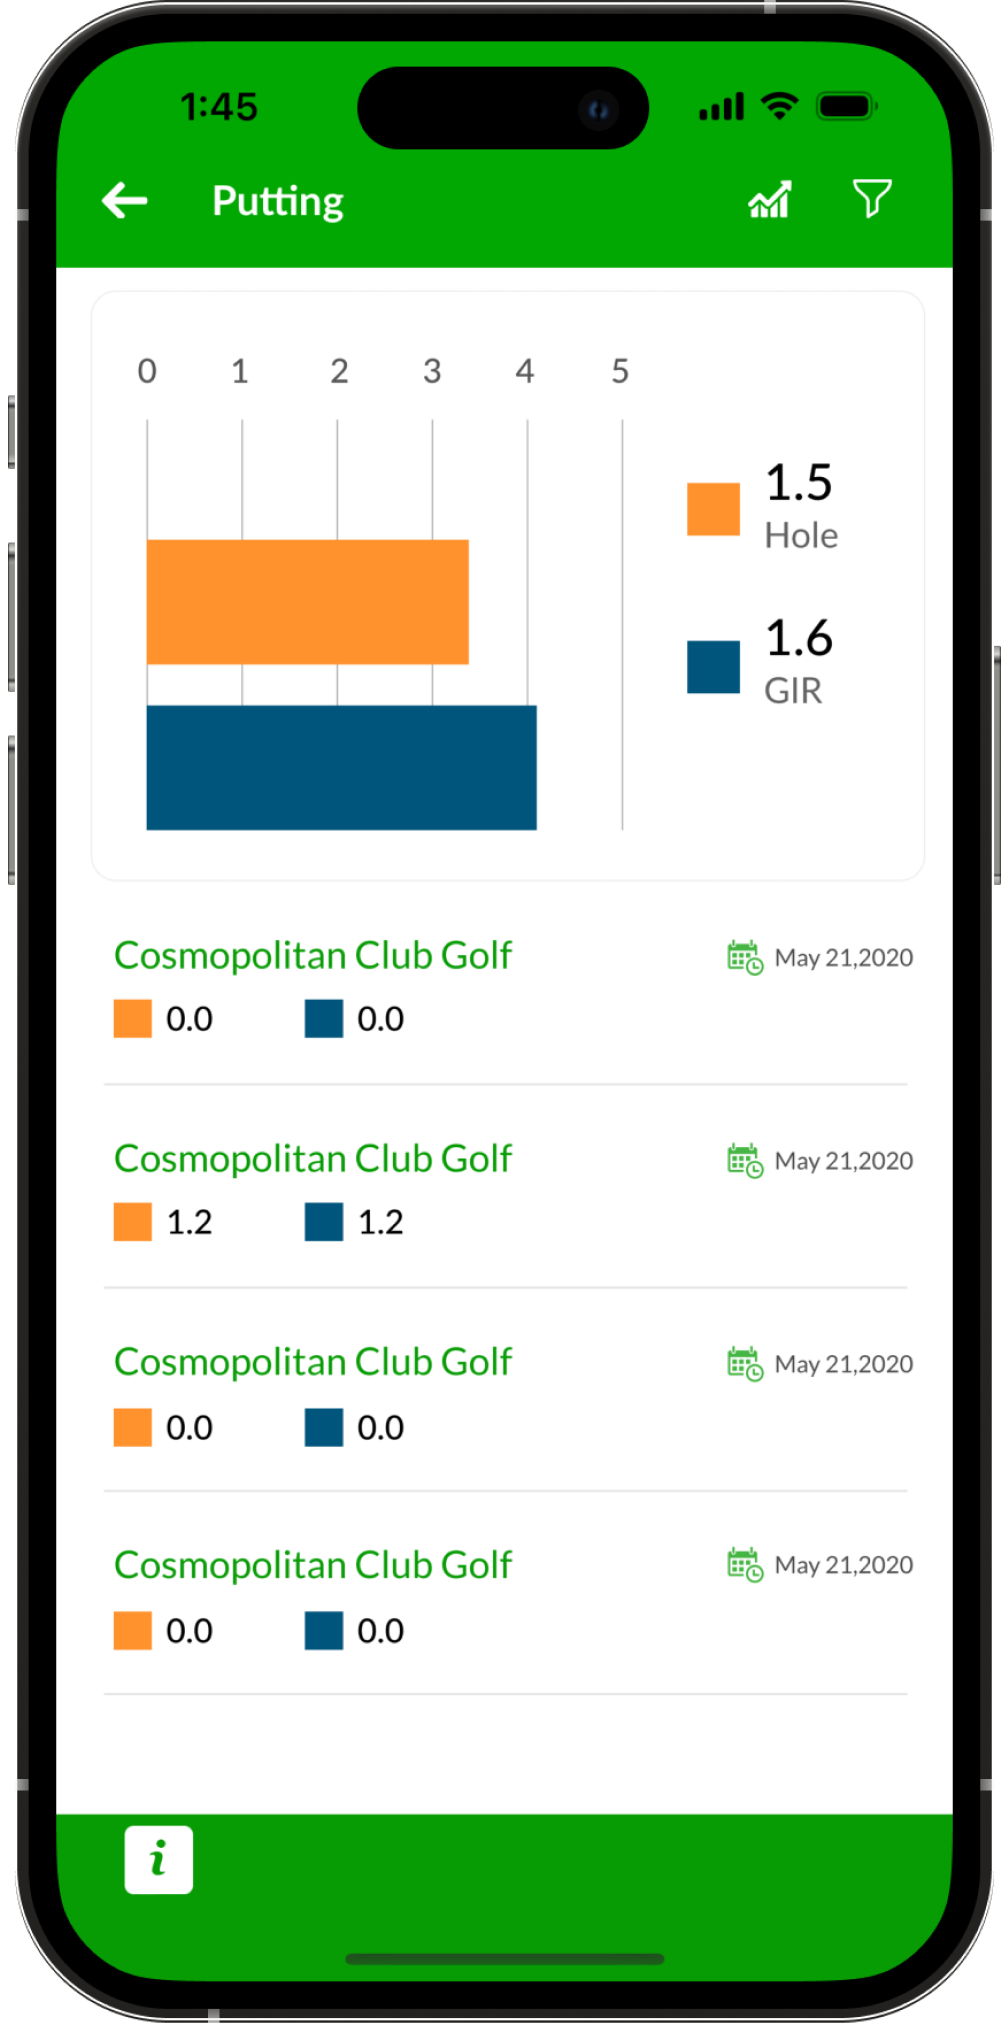 Golf game stats app screenshot showing individual scores with course and date